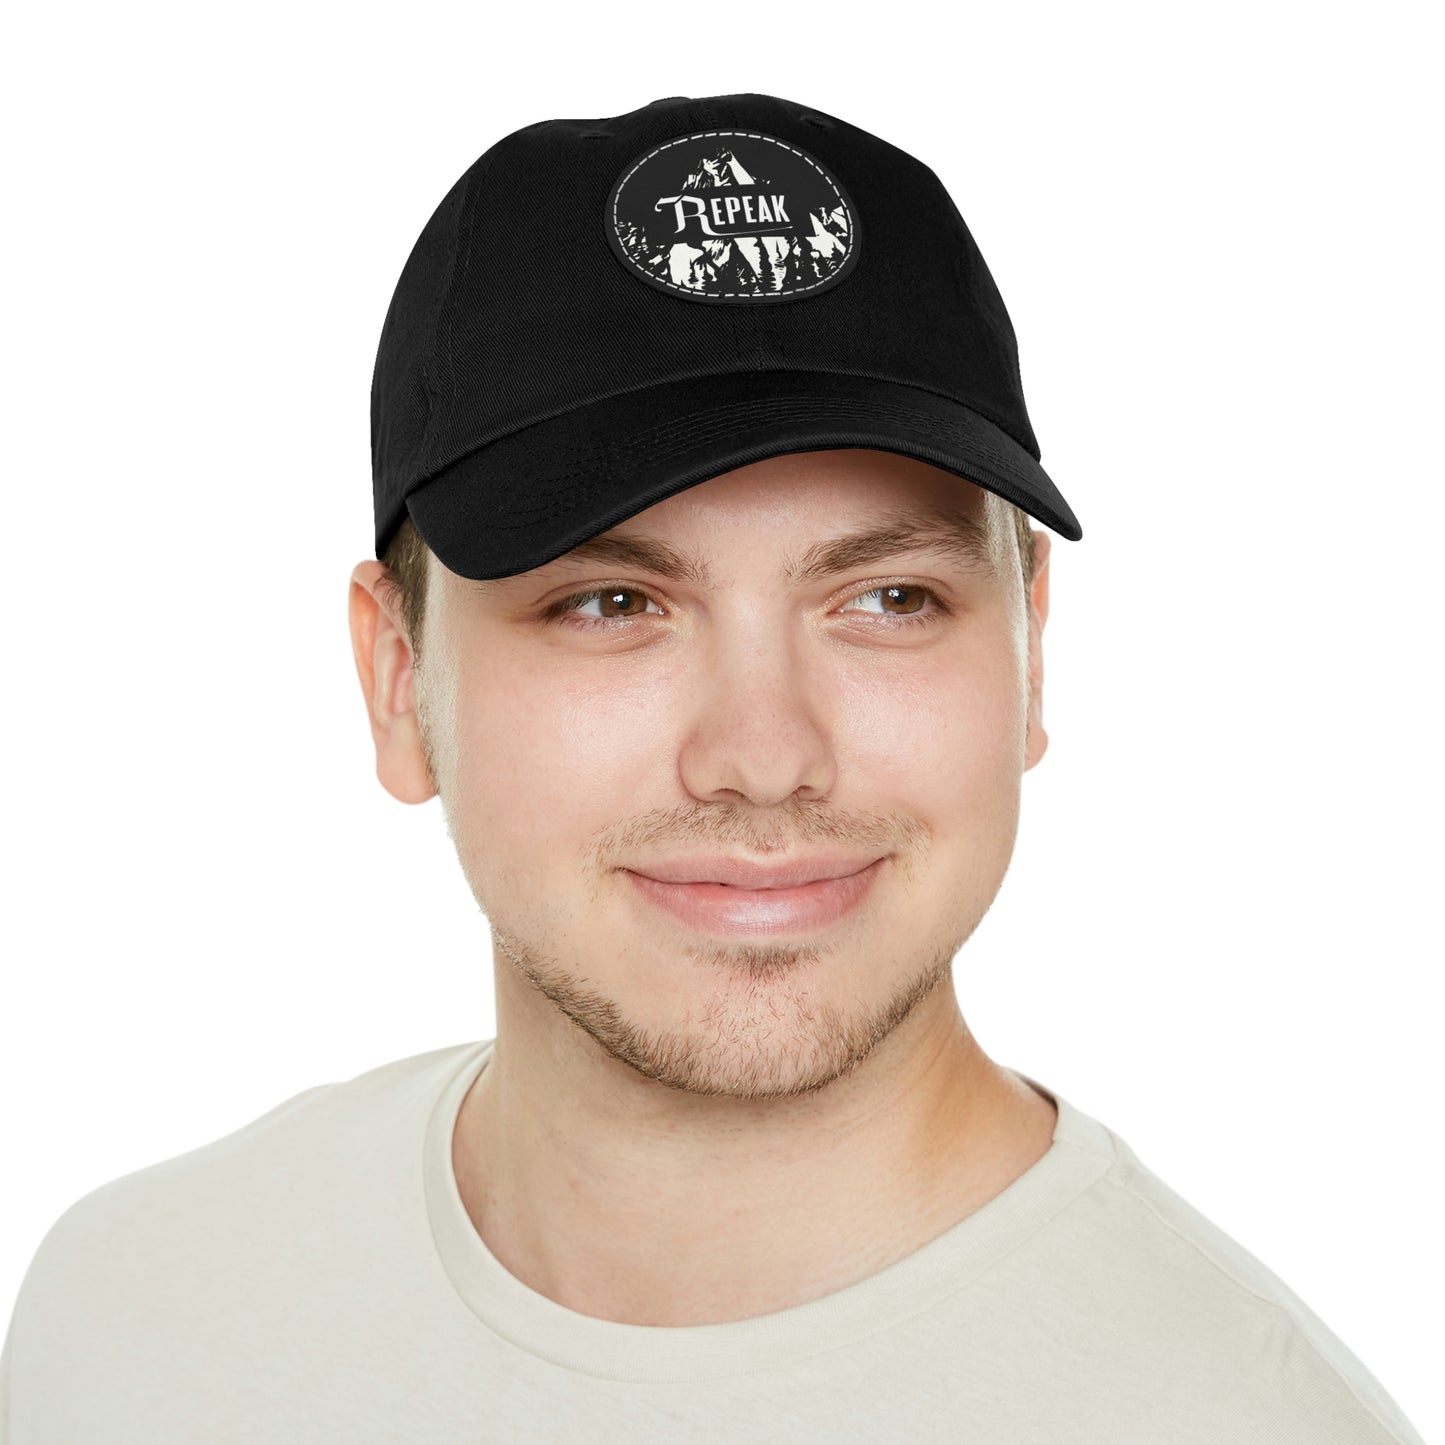 repeak energy dad hat, black and white, front side on model